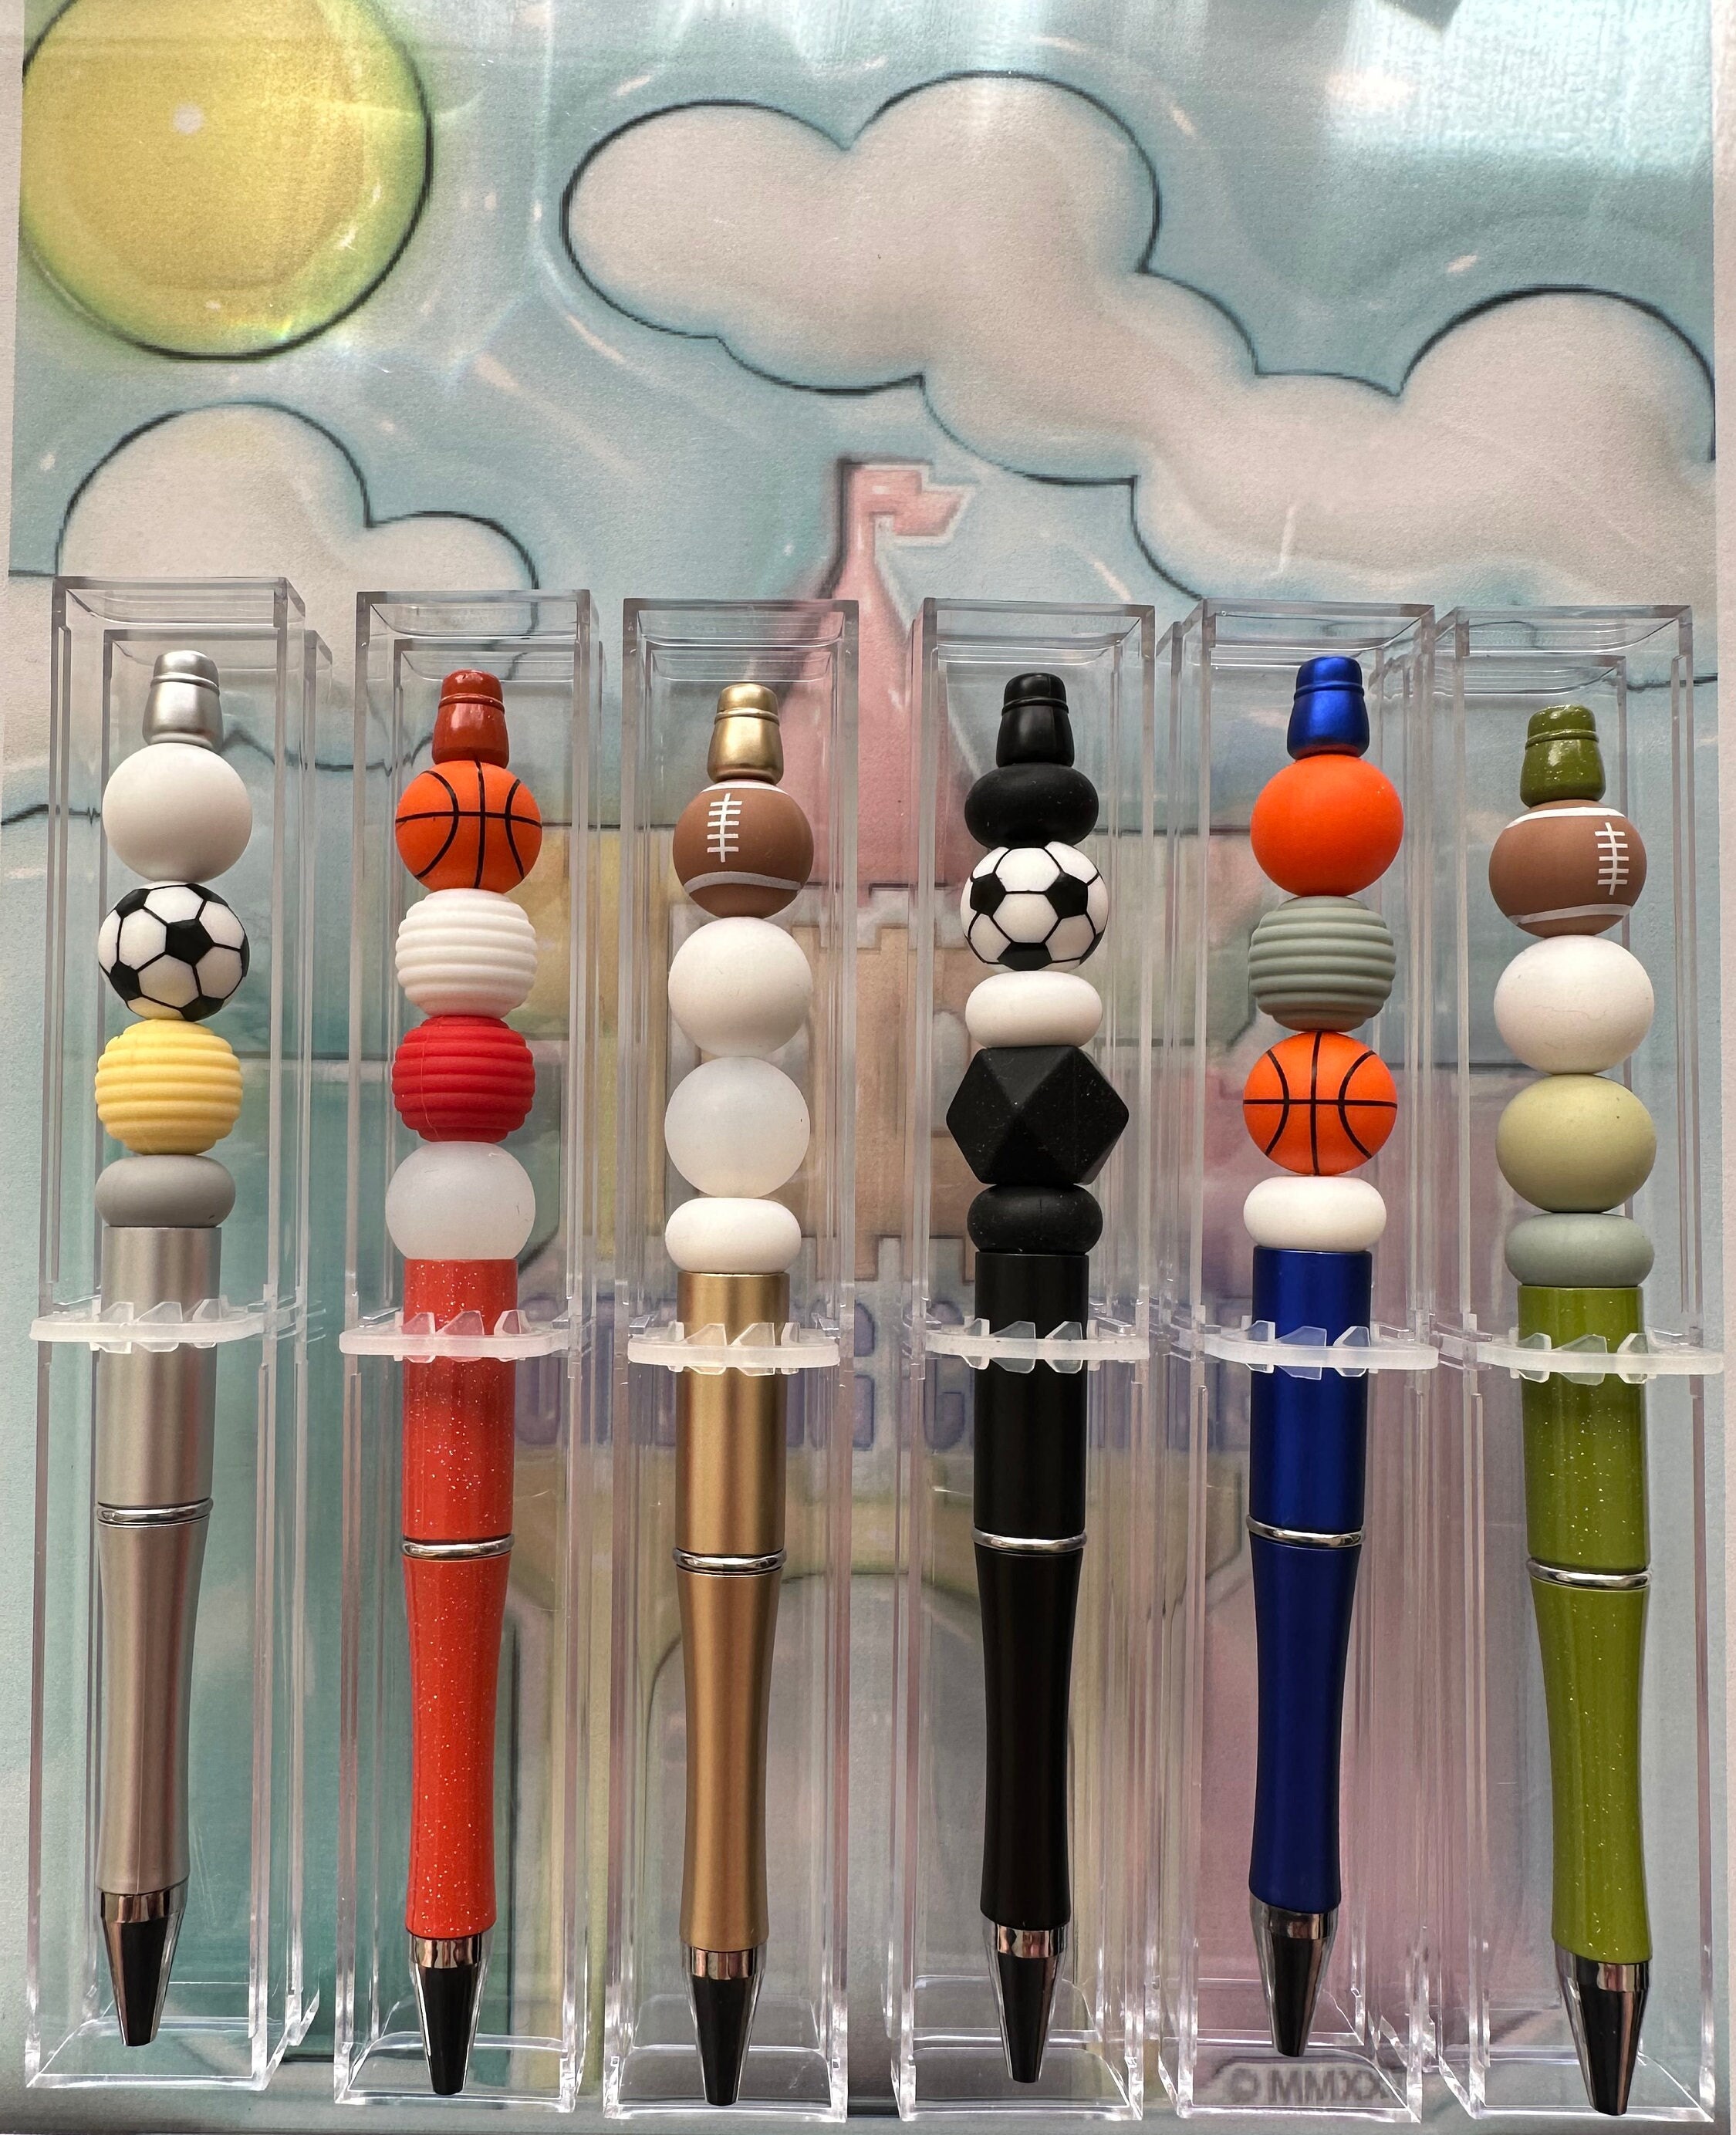 Pens, Silicone Pen, Silicone beads, Beaded pens, custom pens, gummy bear  pen, Silicone bear pen, custom pen, writing pen, silicone beads